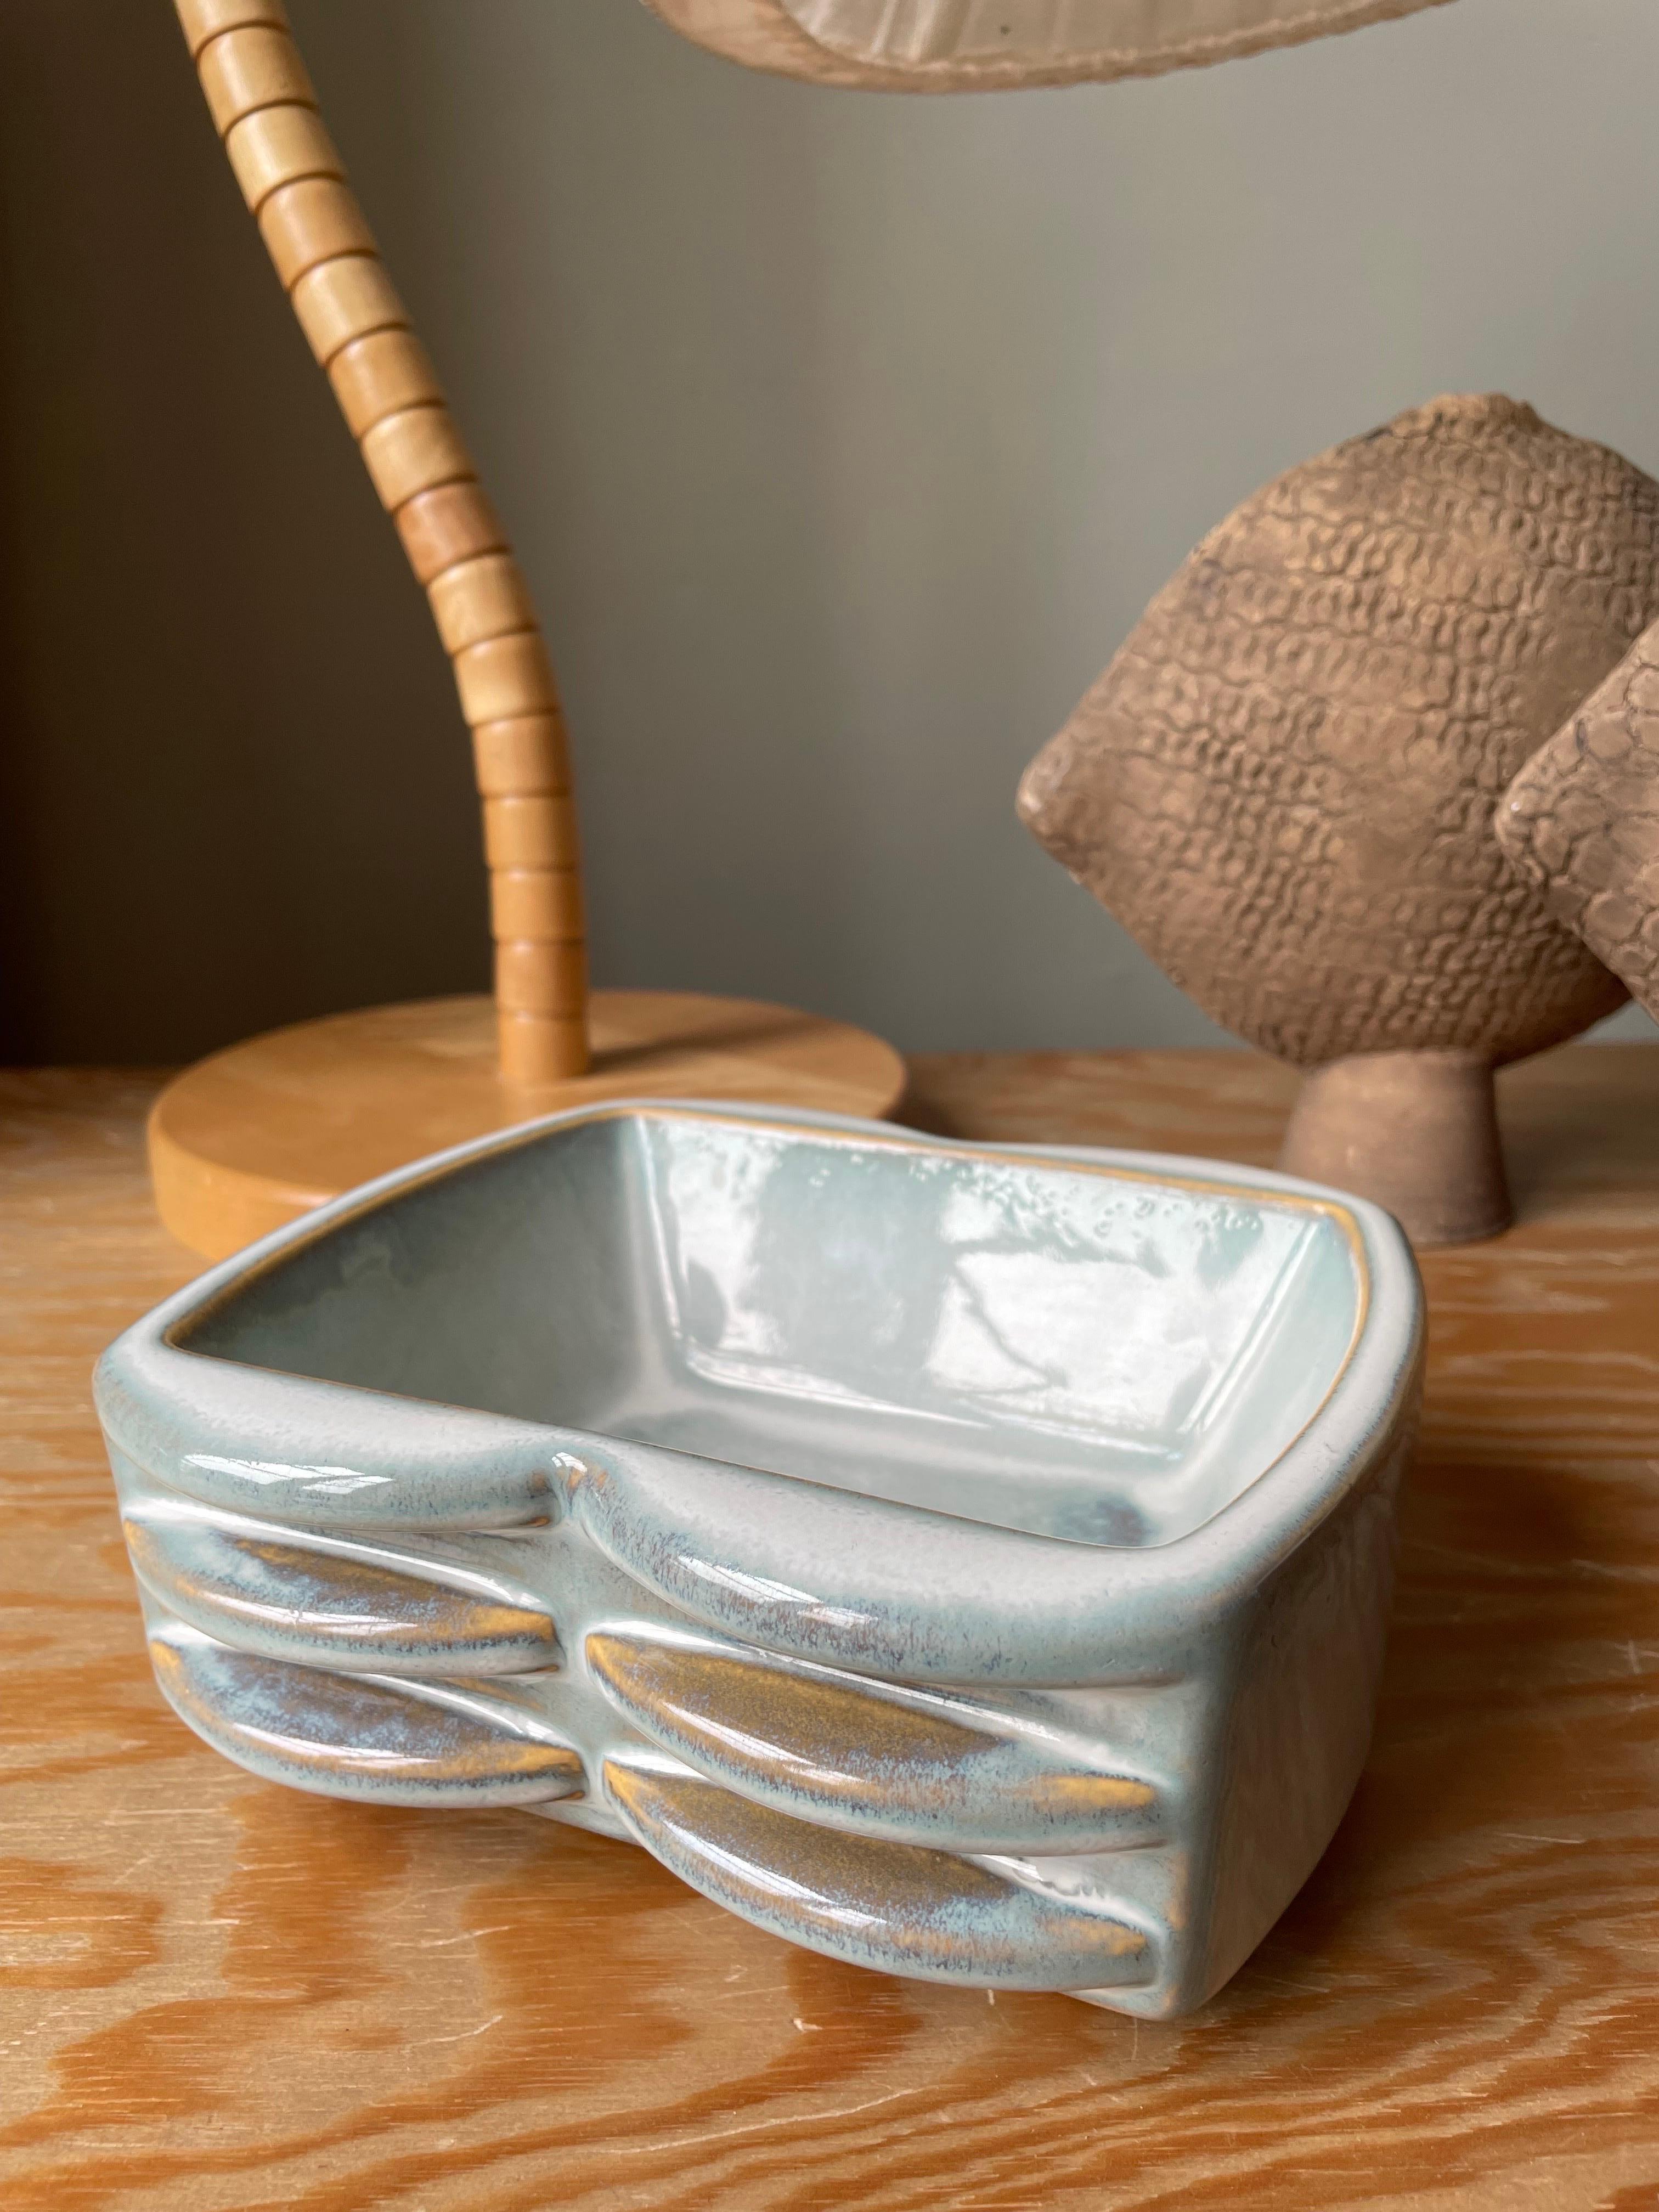 Light blue handmade ceramic Danish midcentury modern decorative vide poche bowl by Einar Johansen for Søholm. Square and soft graphic relief shapes glazed in a dusty light blue and caramel colors. Manufactured at the island of Bornholm in the early